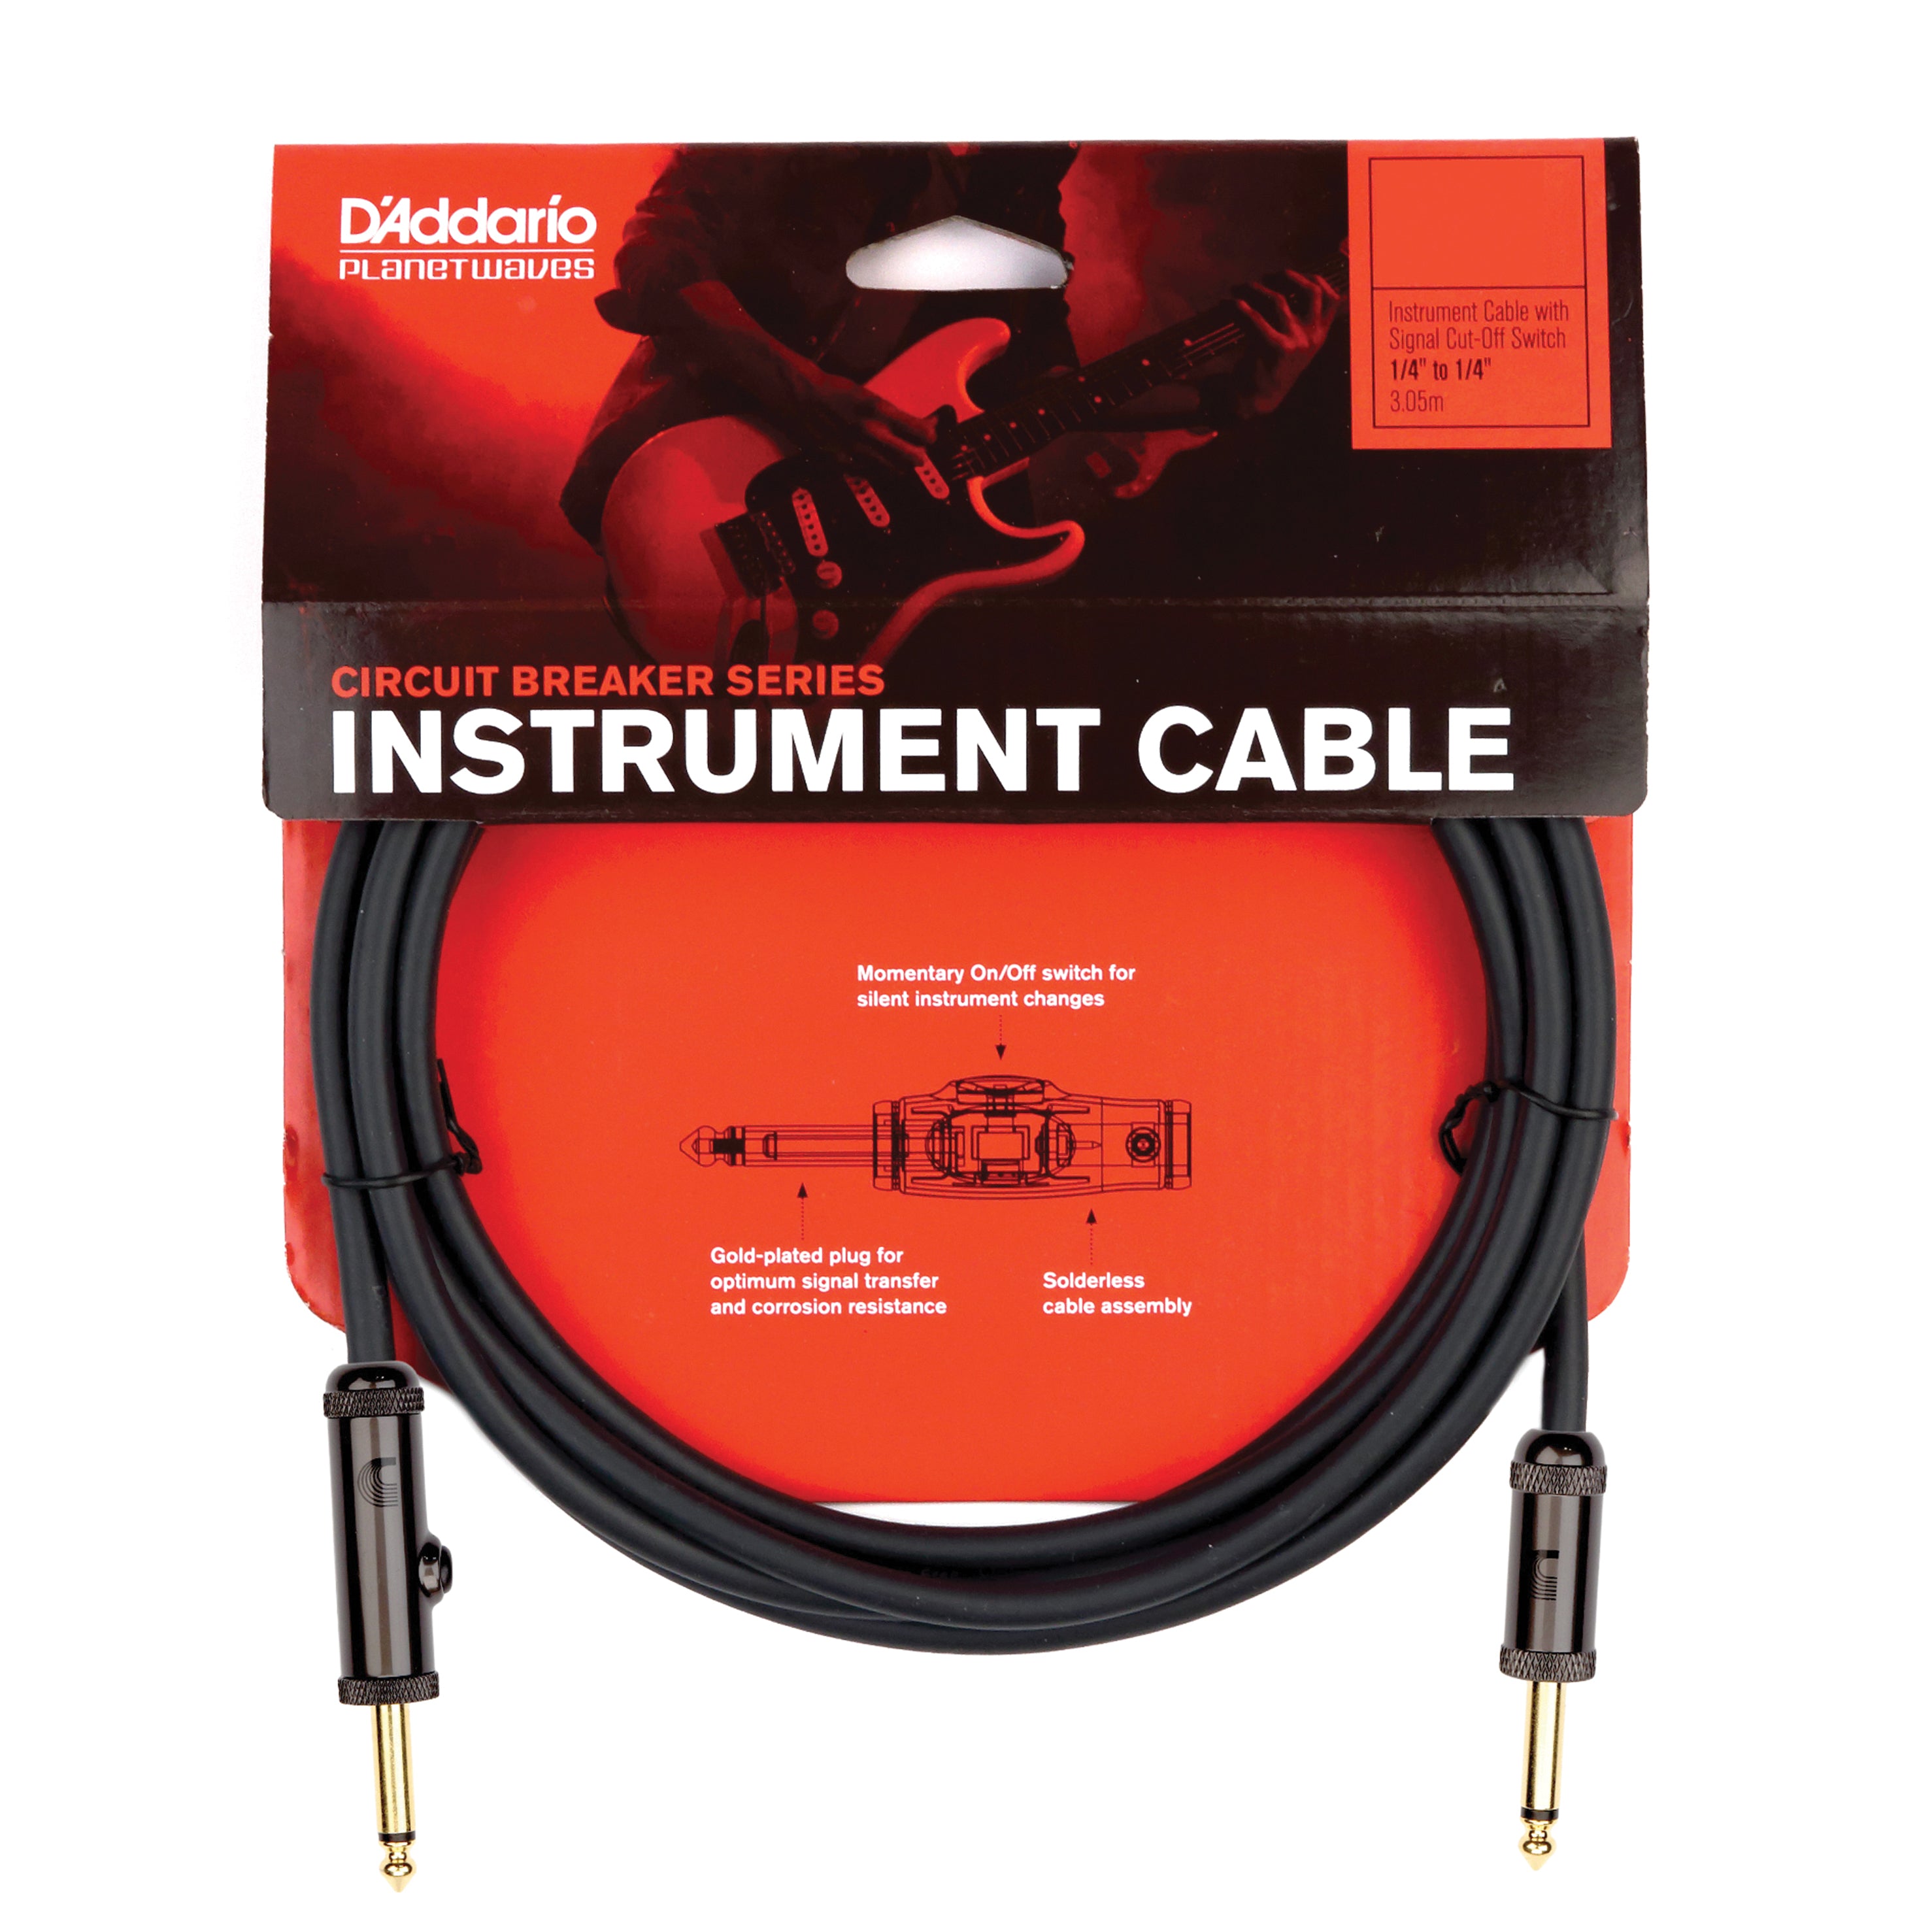 D'Addario Circuit Breaker Momentary Mute Instrument Cable, 10 Feet